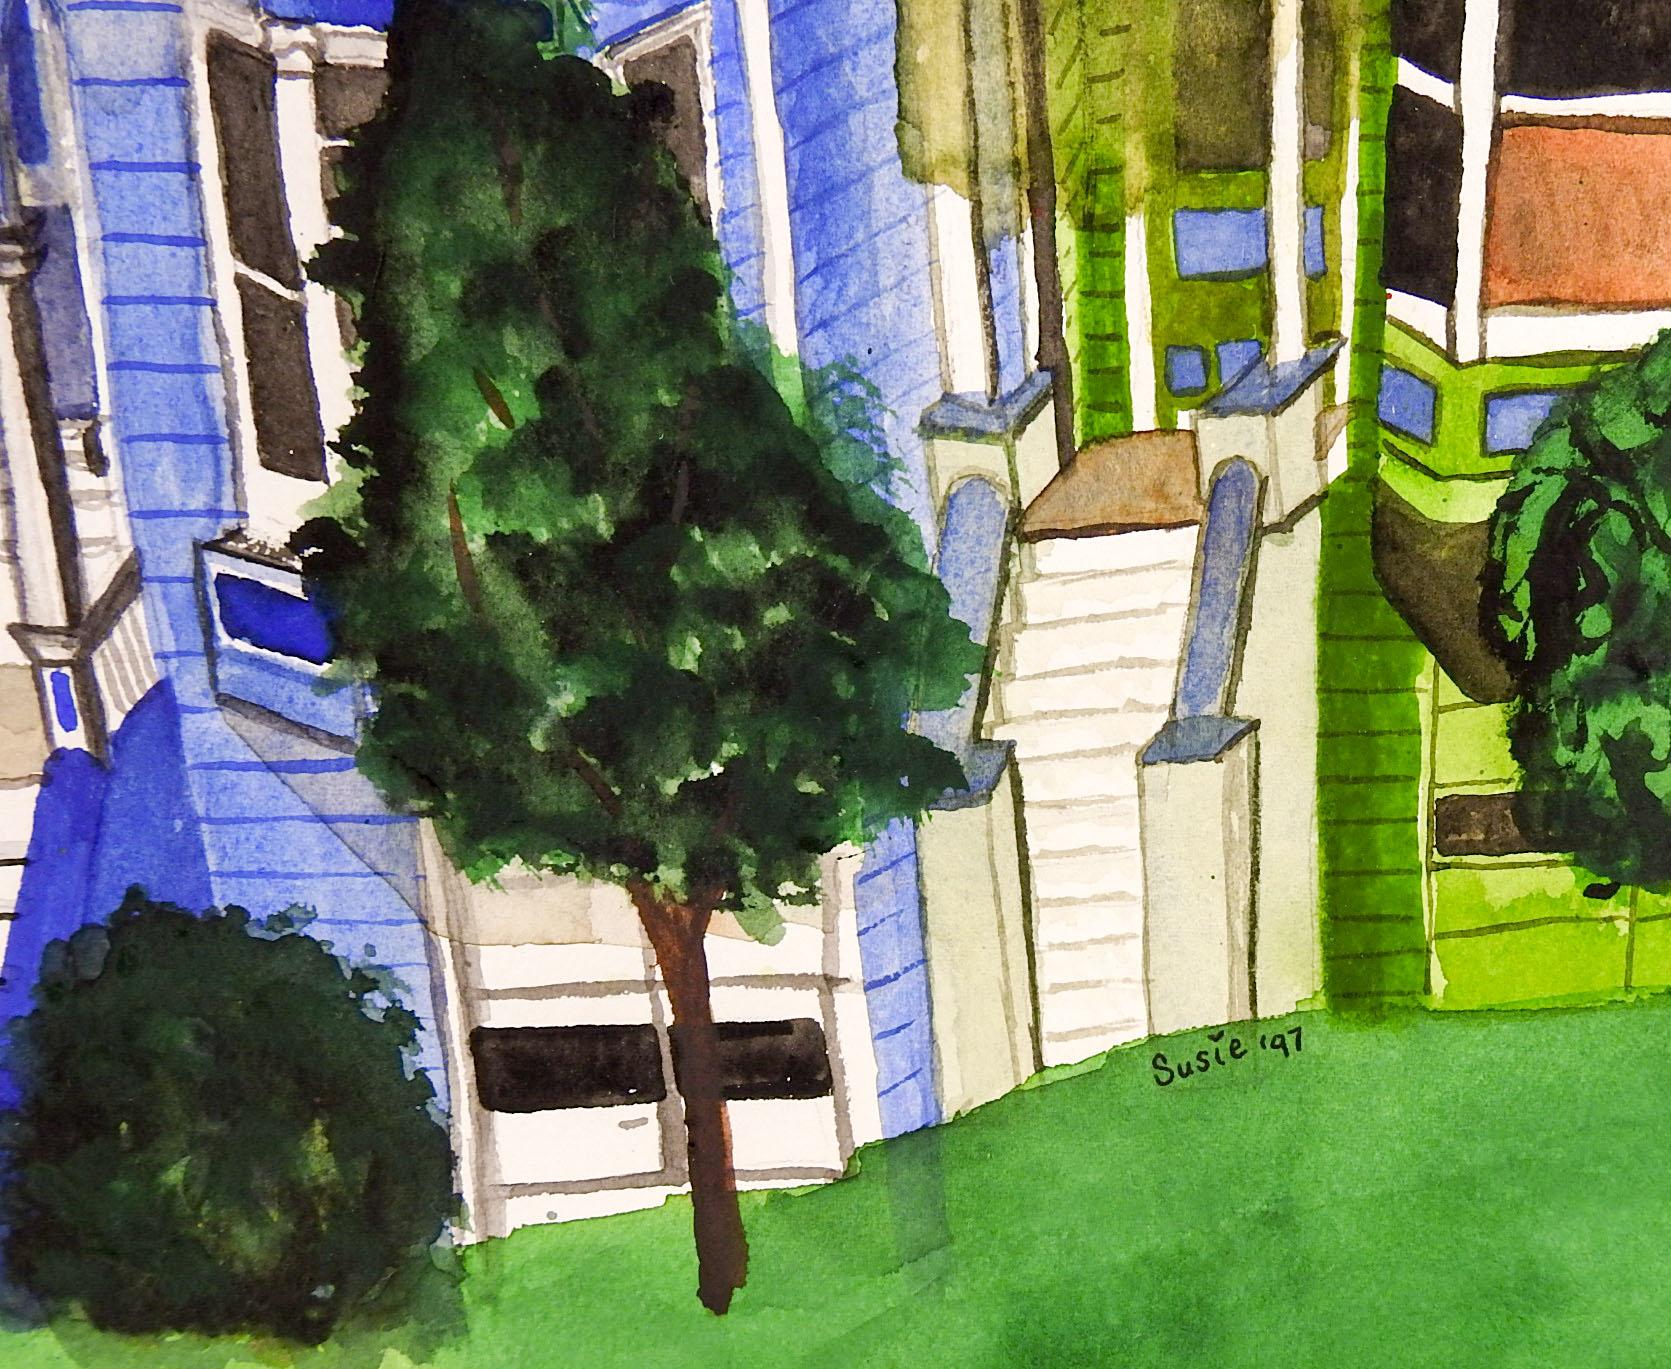 Watercolor on paper of brightly colored Victorian houses. Signed Susie 1997 lower right corner. Unframed.